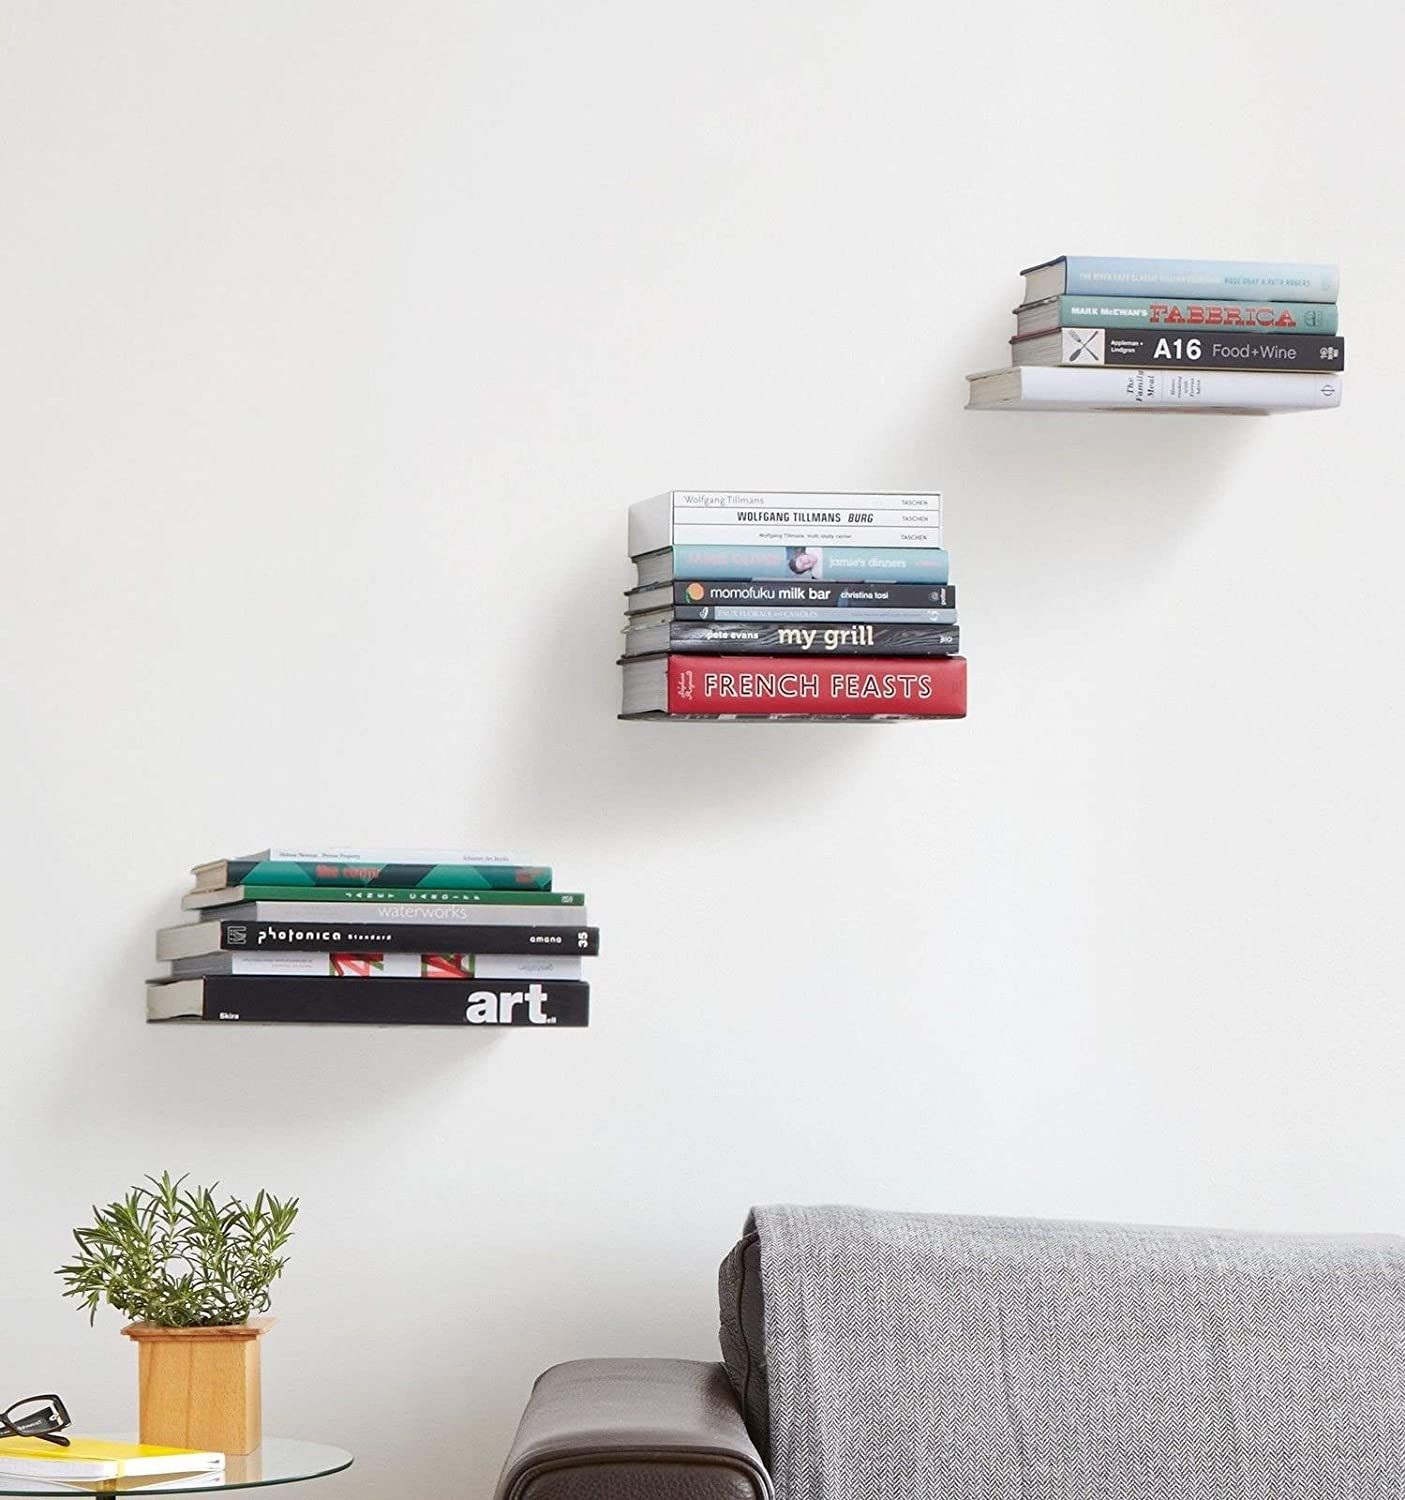 three stacks of books that appear to be floating on the wall